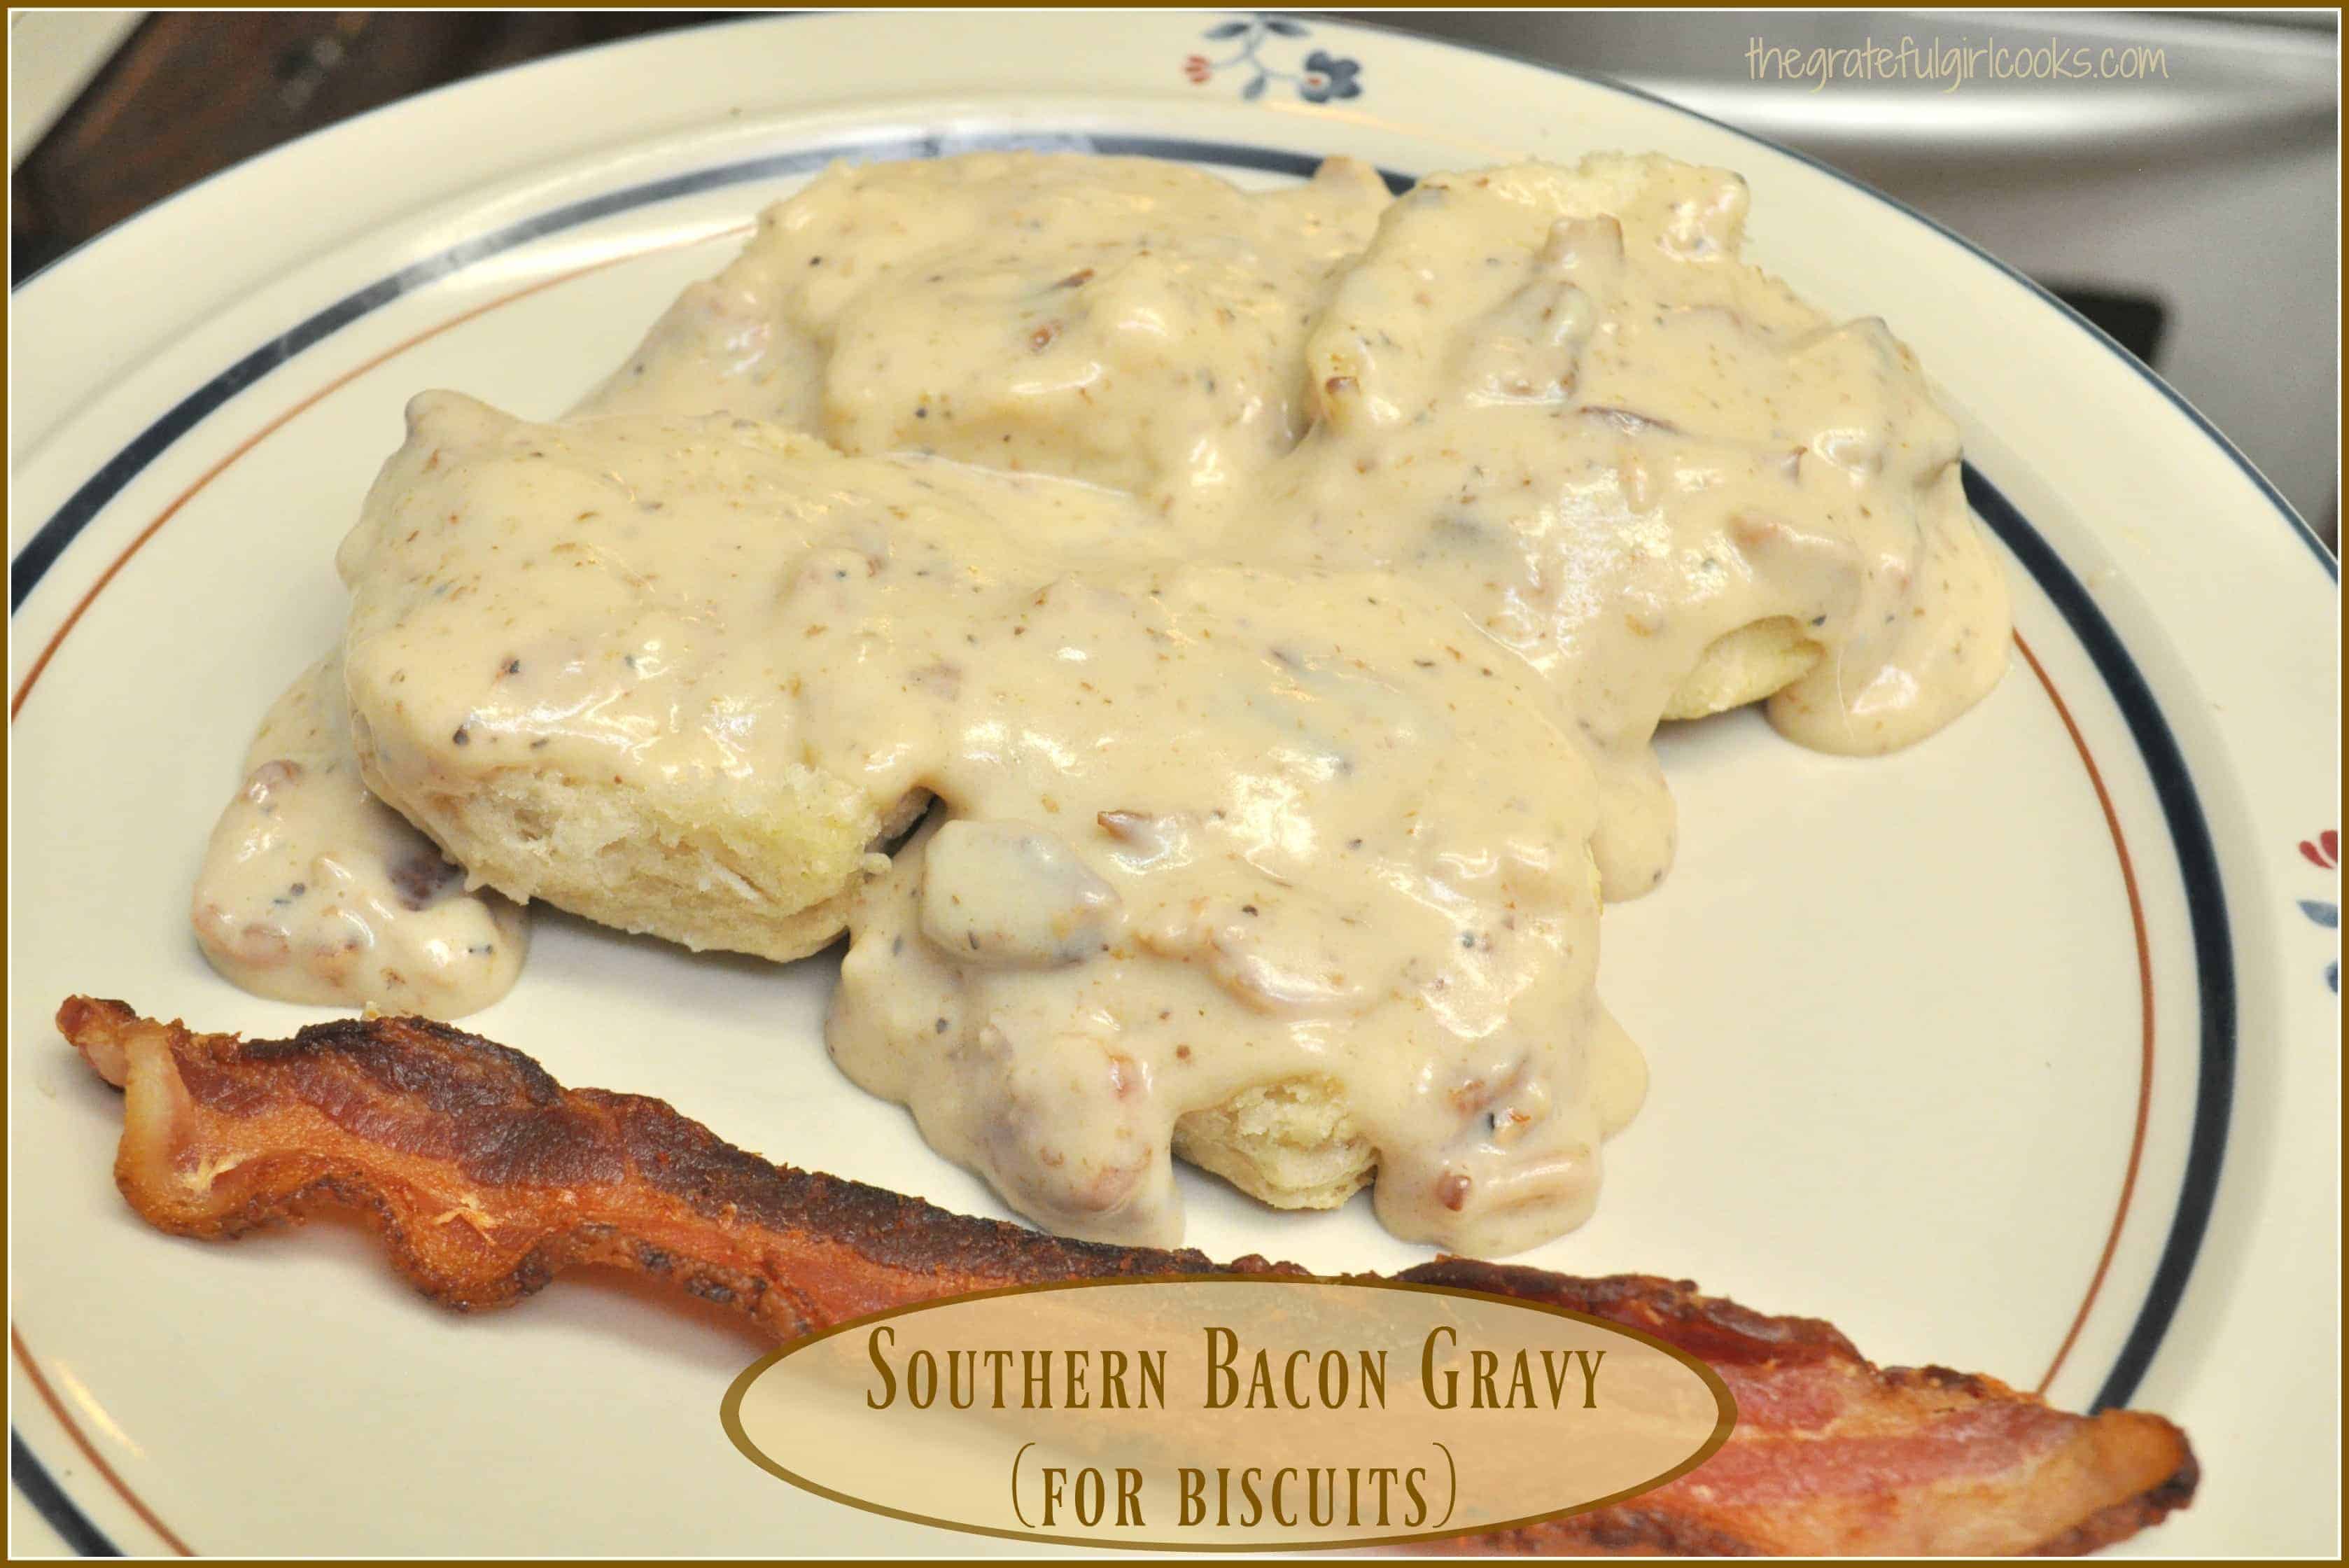 Southern Bacon Gravy (For Biscuits) | The Grateful Girl Cooks!